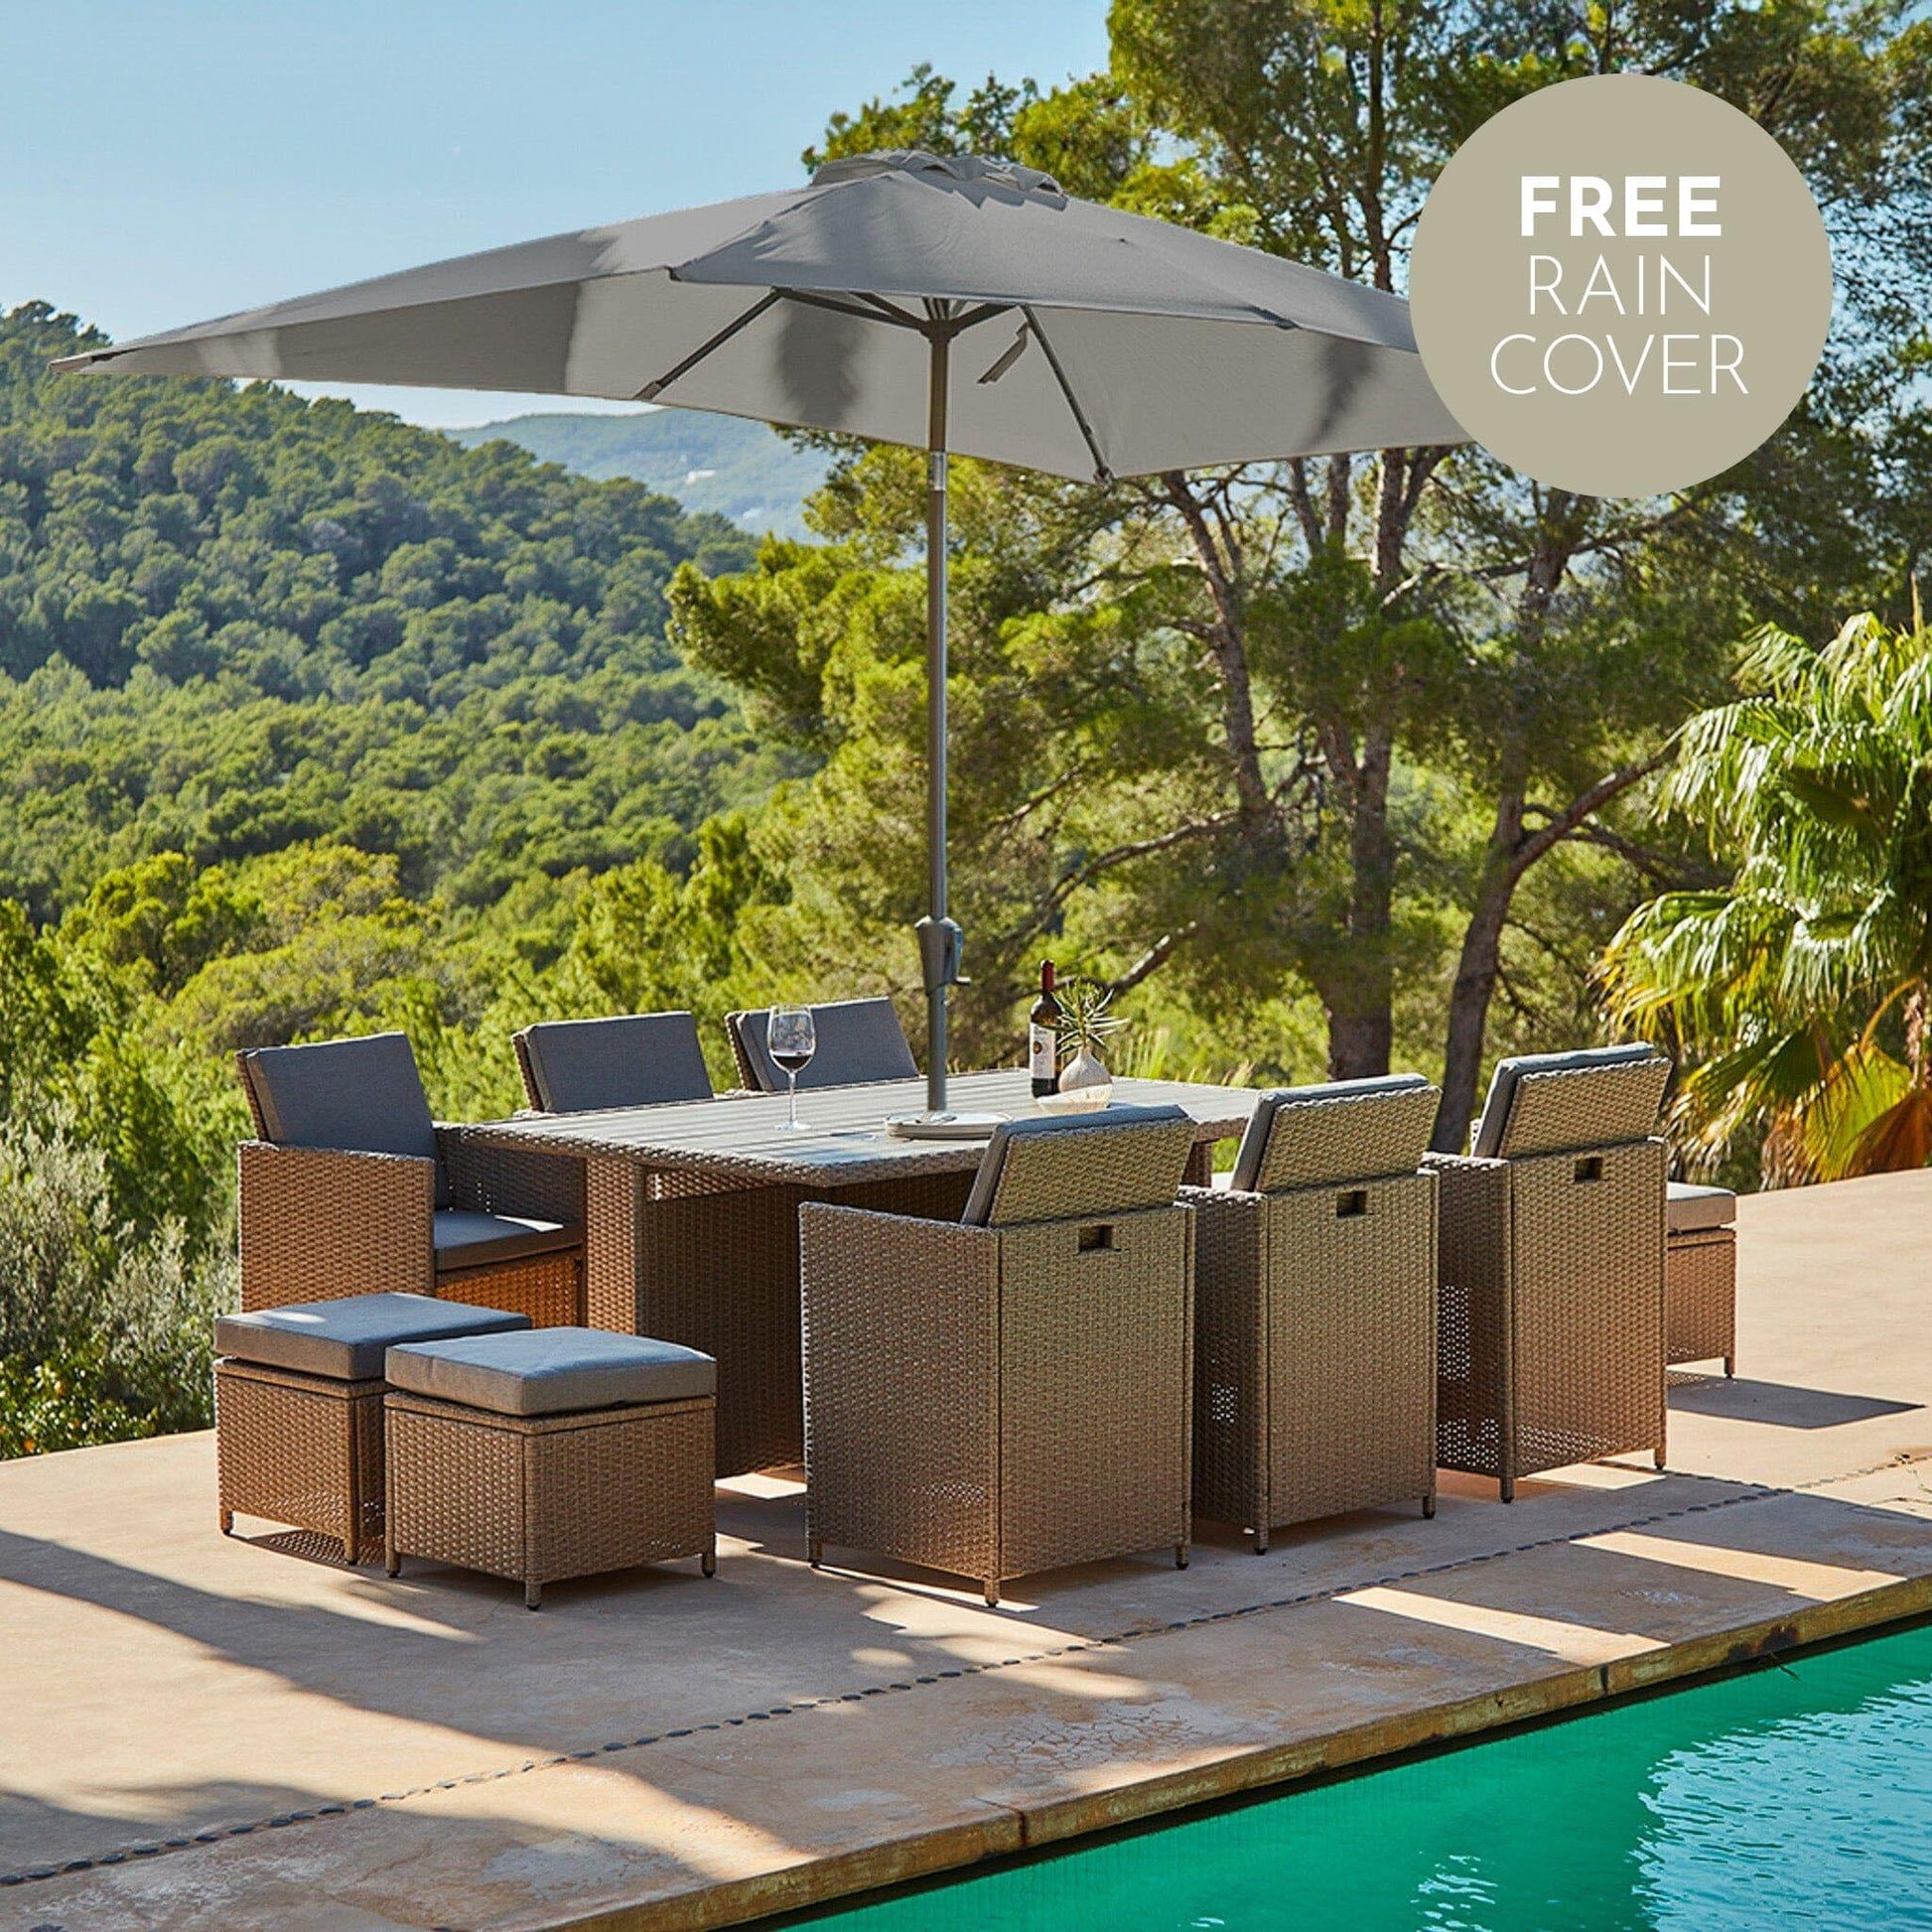 10 Seater Rattan Cube Outdoor Dining Set with Grey LED Premium Parasol - Natural Brown Weave Polywood Top